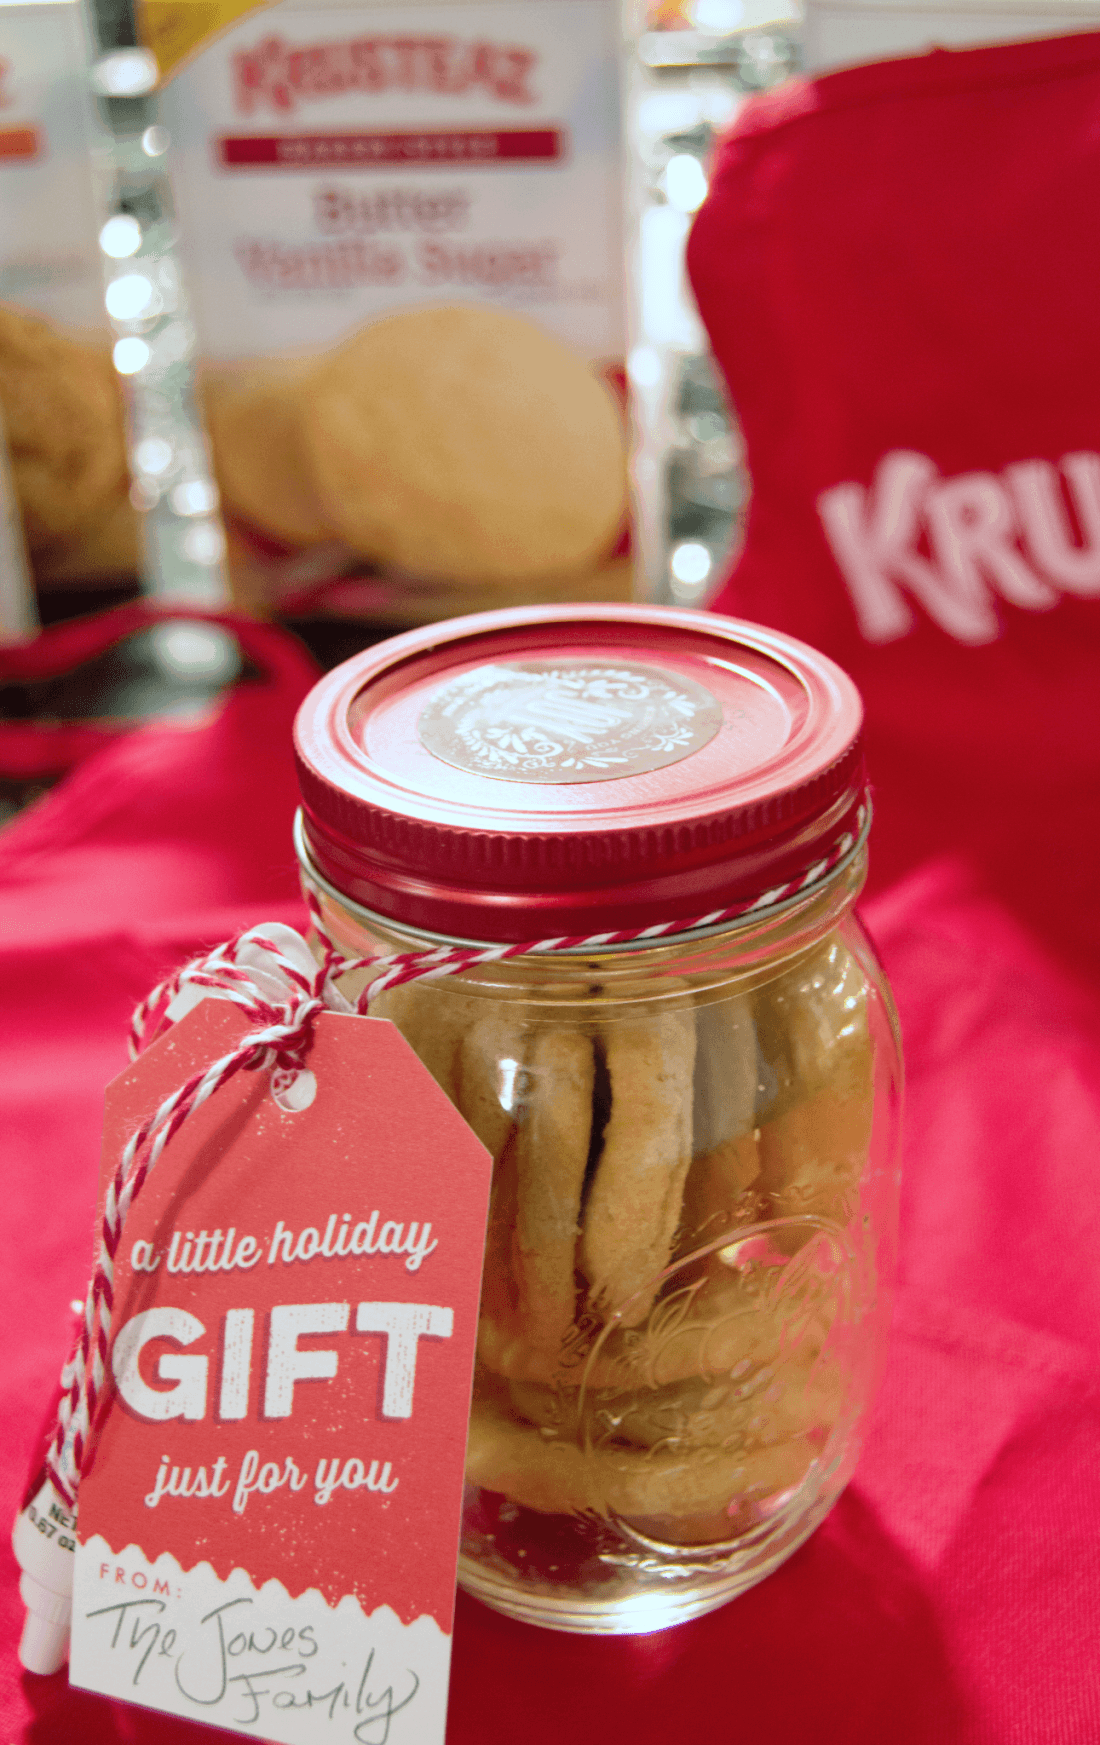 Gift Idea &#8211; Cookies With Frosting For Decorating!